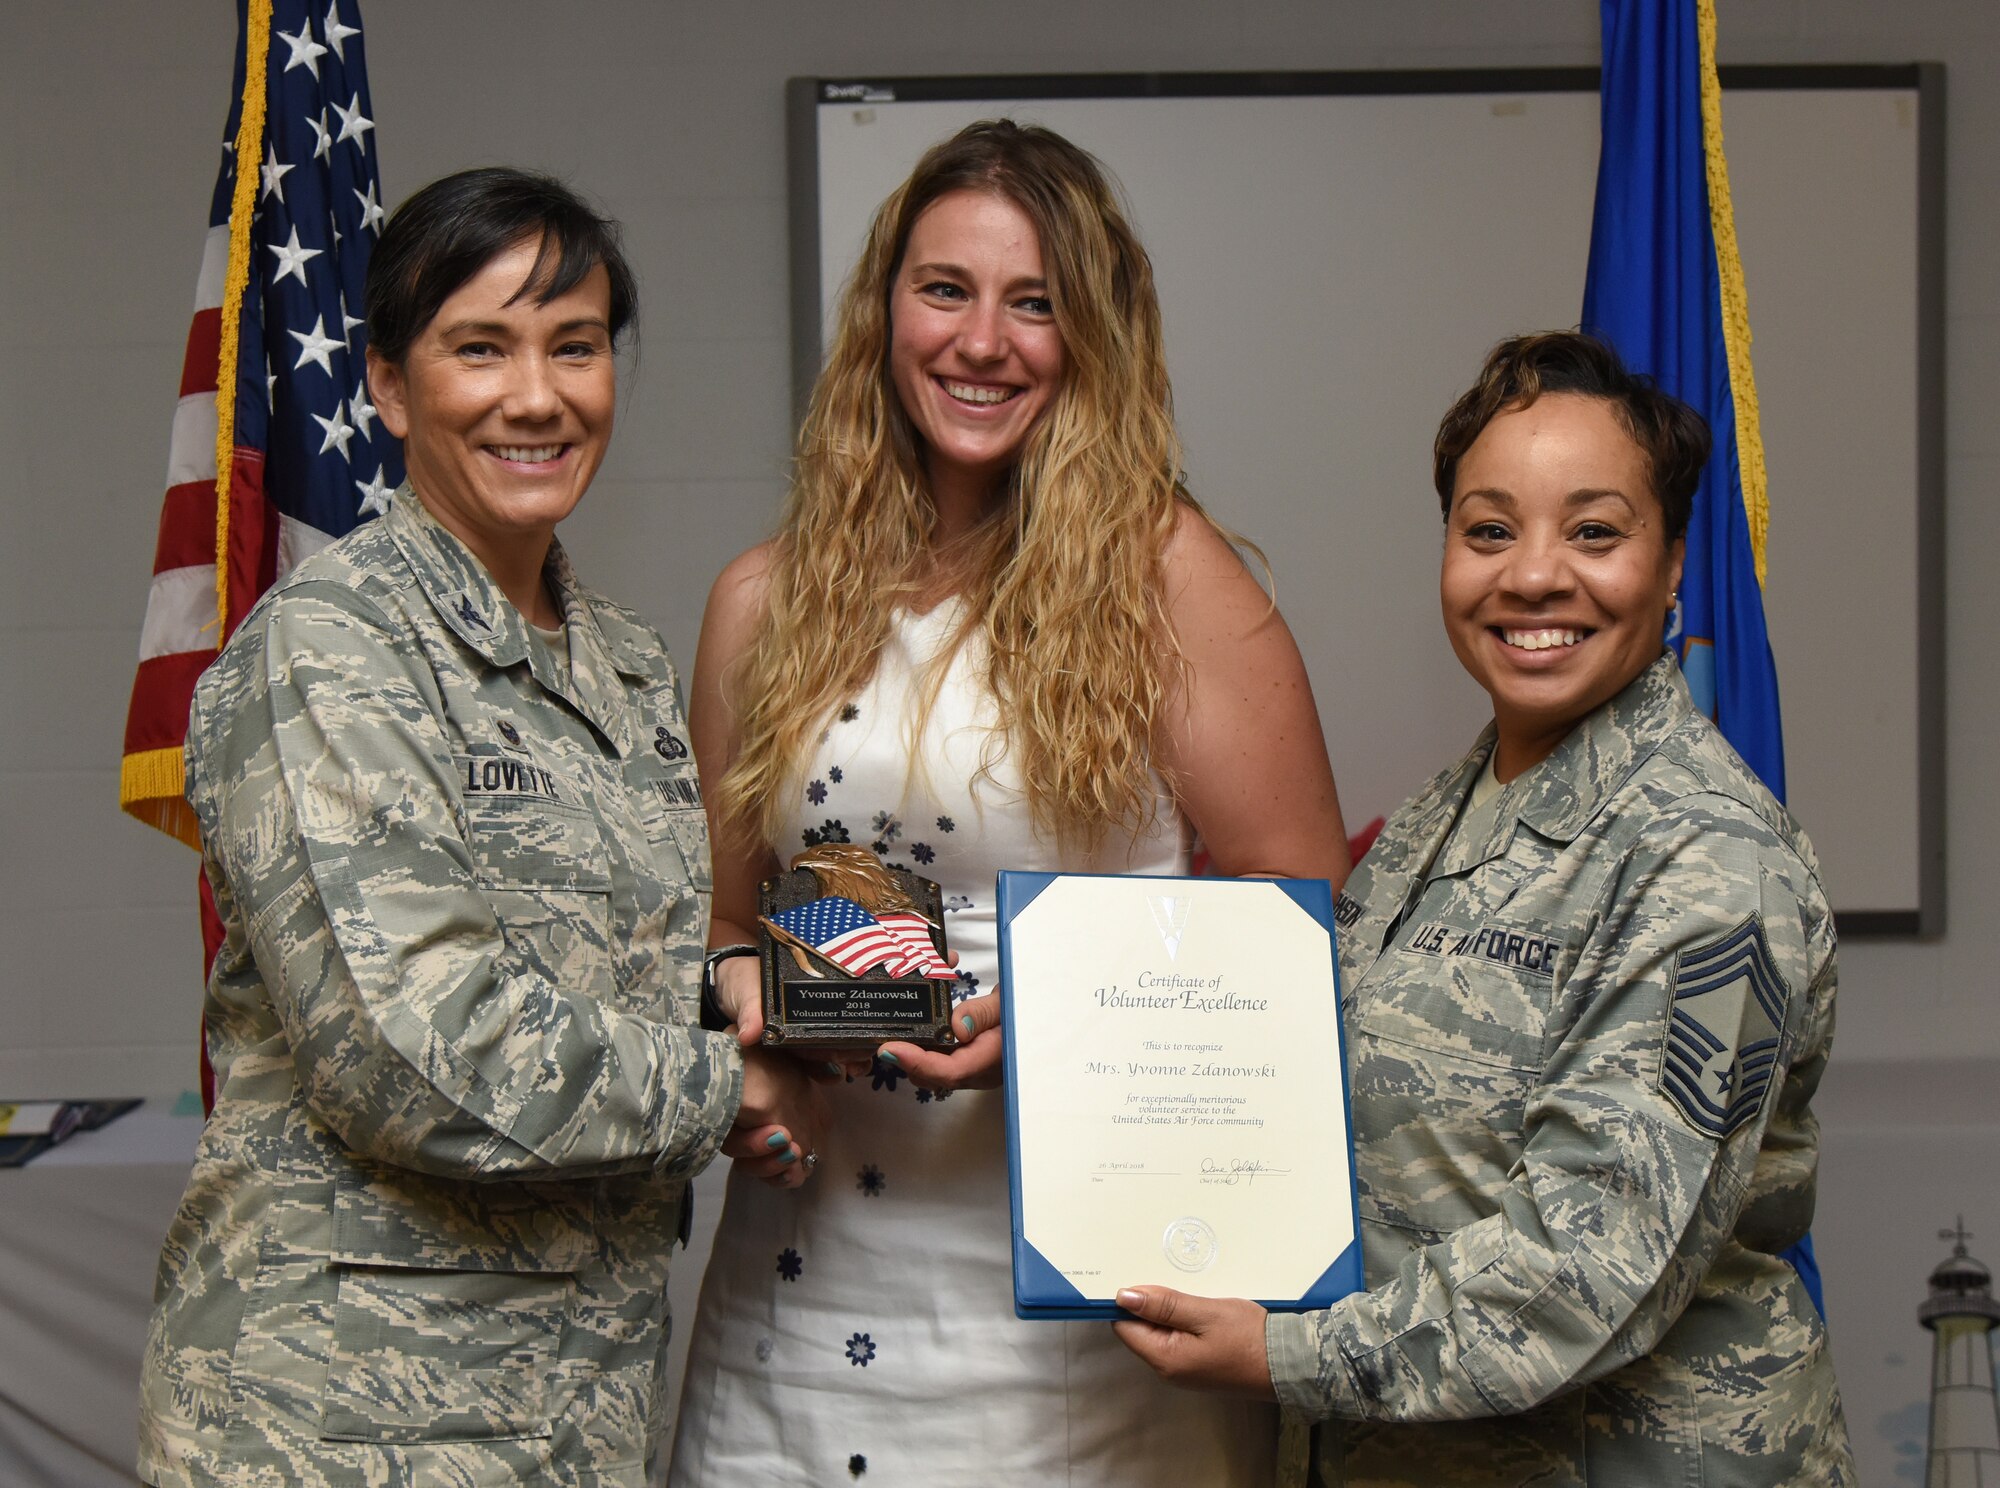 U.S. Air Force Col. Debra Lovette, 81st Training Wing commander, and Chief Master Sgt. Tanya Johnson, 81st Diagnostic and Therapeutics Squadron superintendent, presents Yvonne Zdanowski, spouse of 2nd Lt. Paul Zdanowski, 81st Force Support Squadron resource management officer in charge, with a Volunteer Excellence certificate during the 2018 Volunteer Appreciation Ceremony at the Sablich Center at Keesler Air Force Base, Mississippi, April 26, 2018. The event recognized Keesler personnel, family members and retirees for their volunteer service in 2017. (U.S. Air Force photo by Kemberly Groue)